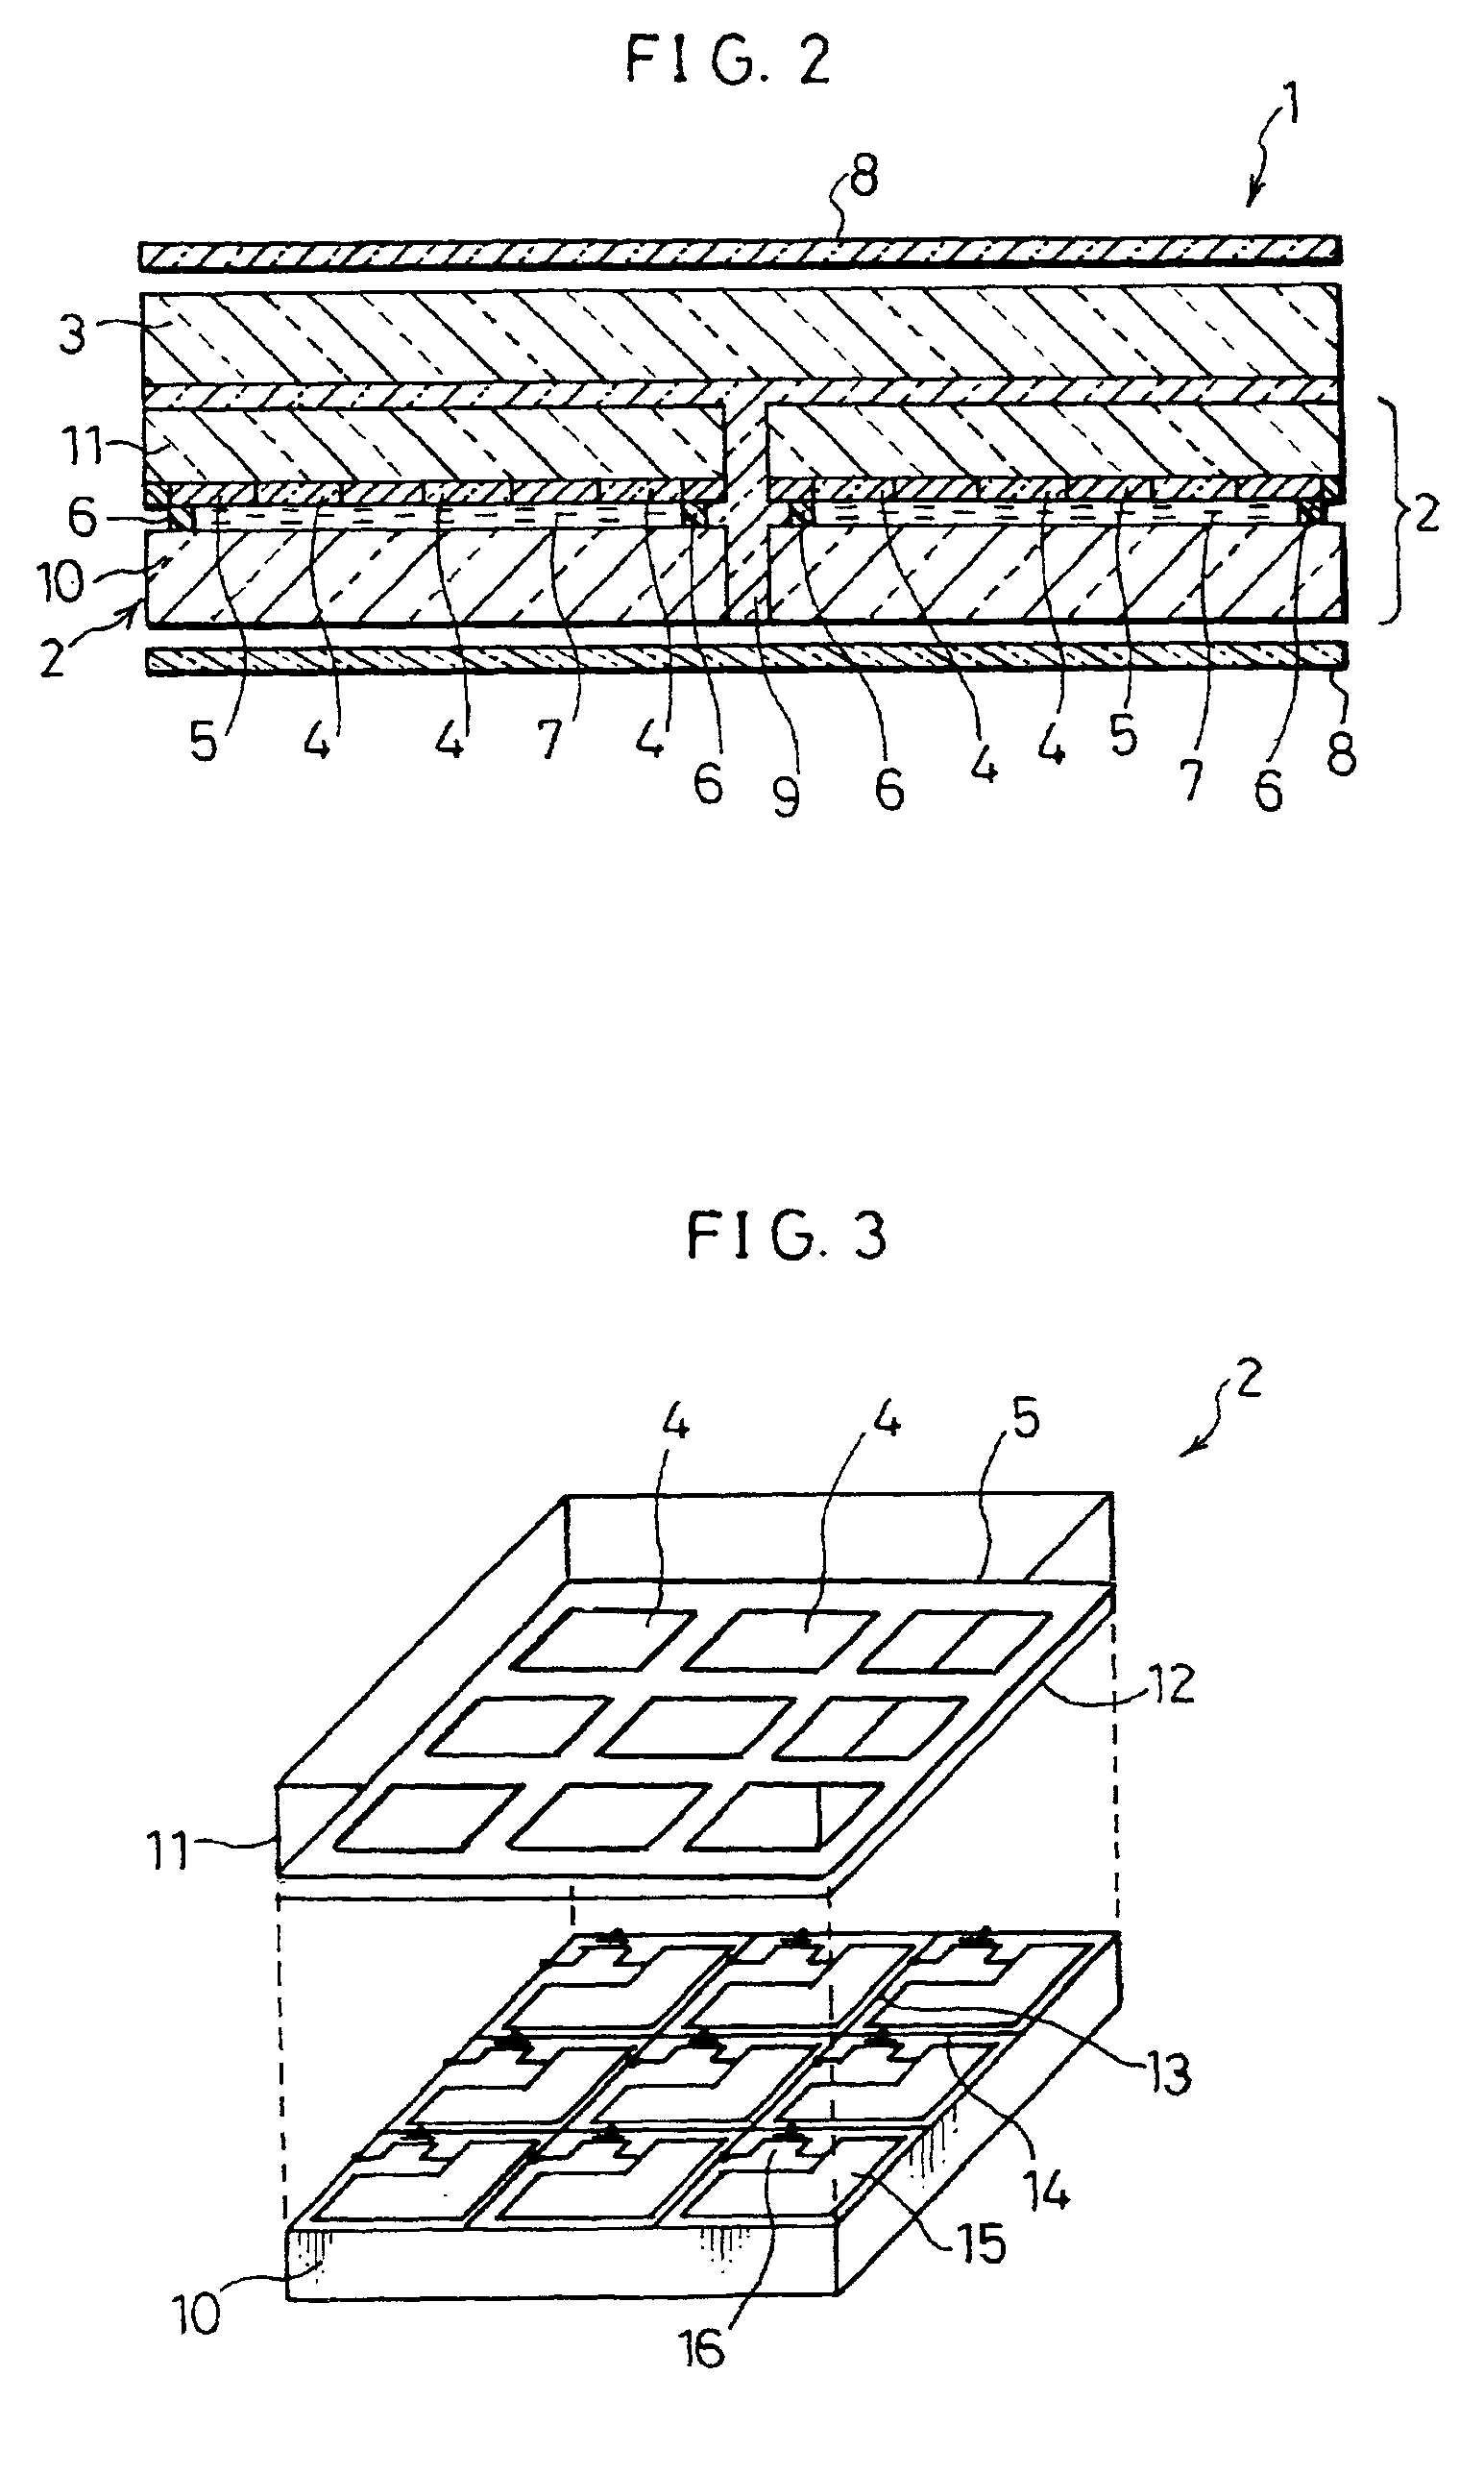 Display device utilizing a plurality of adjoining display panels to form single display screen and methods related thereto